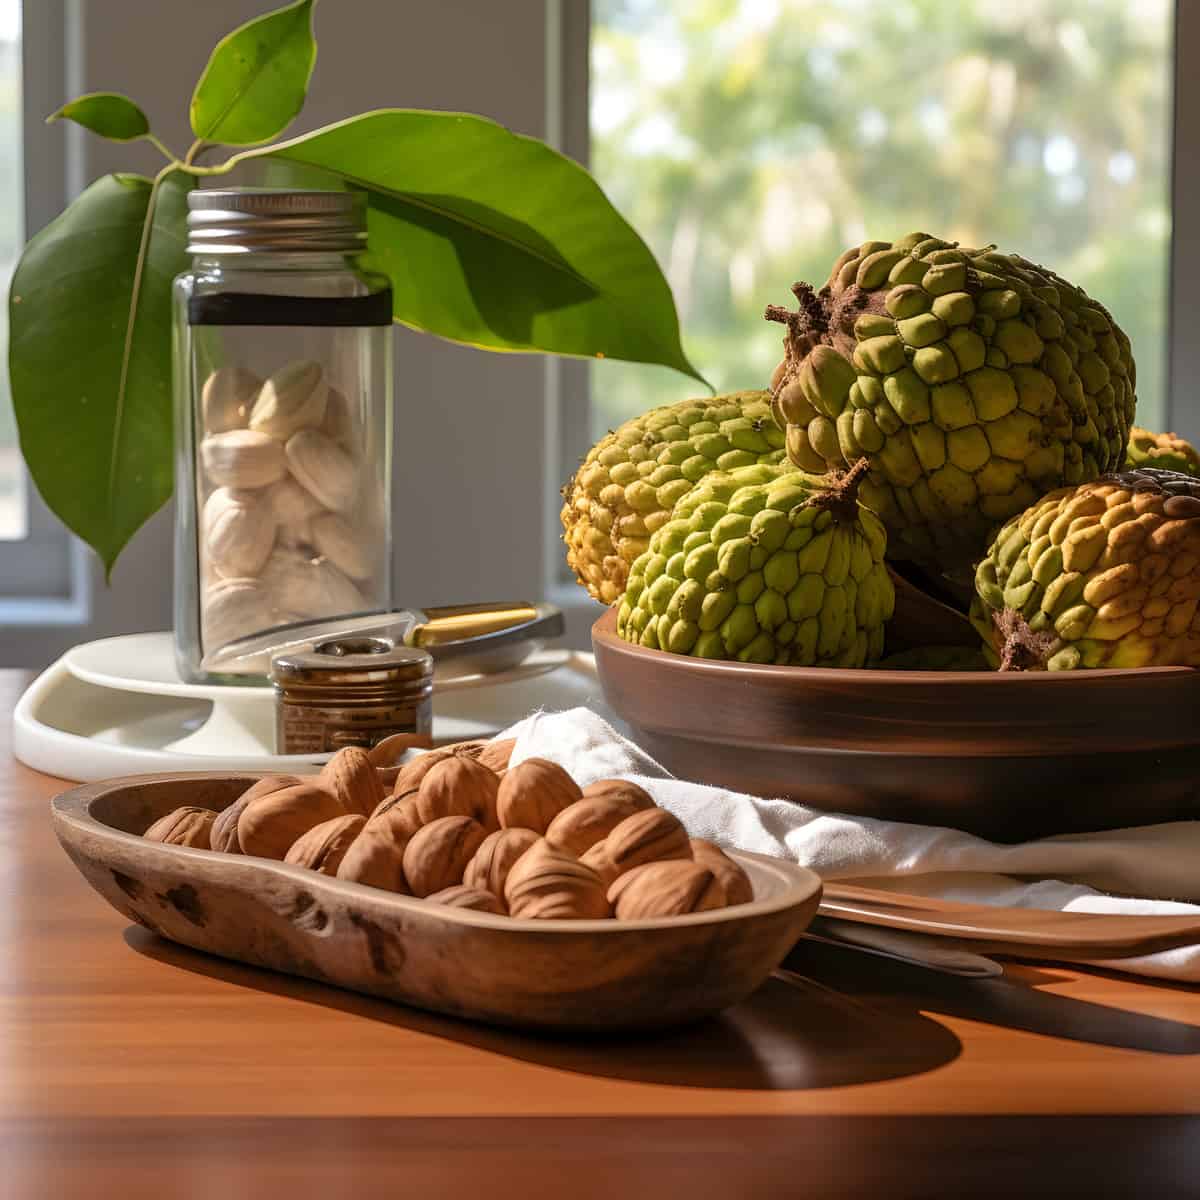 Annona Nutans on a kitchen counter